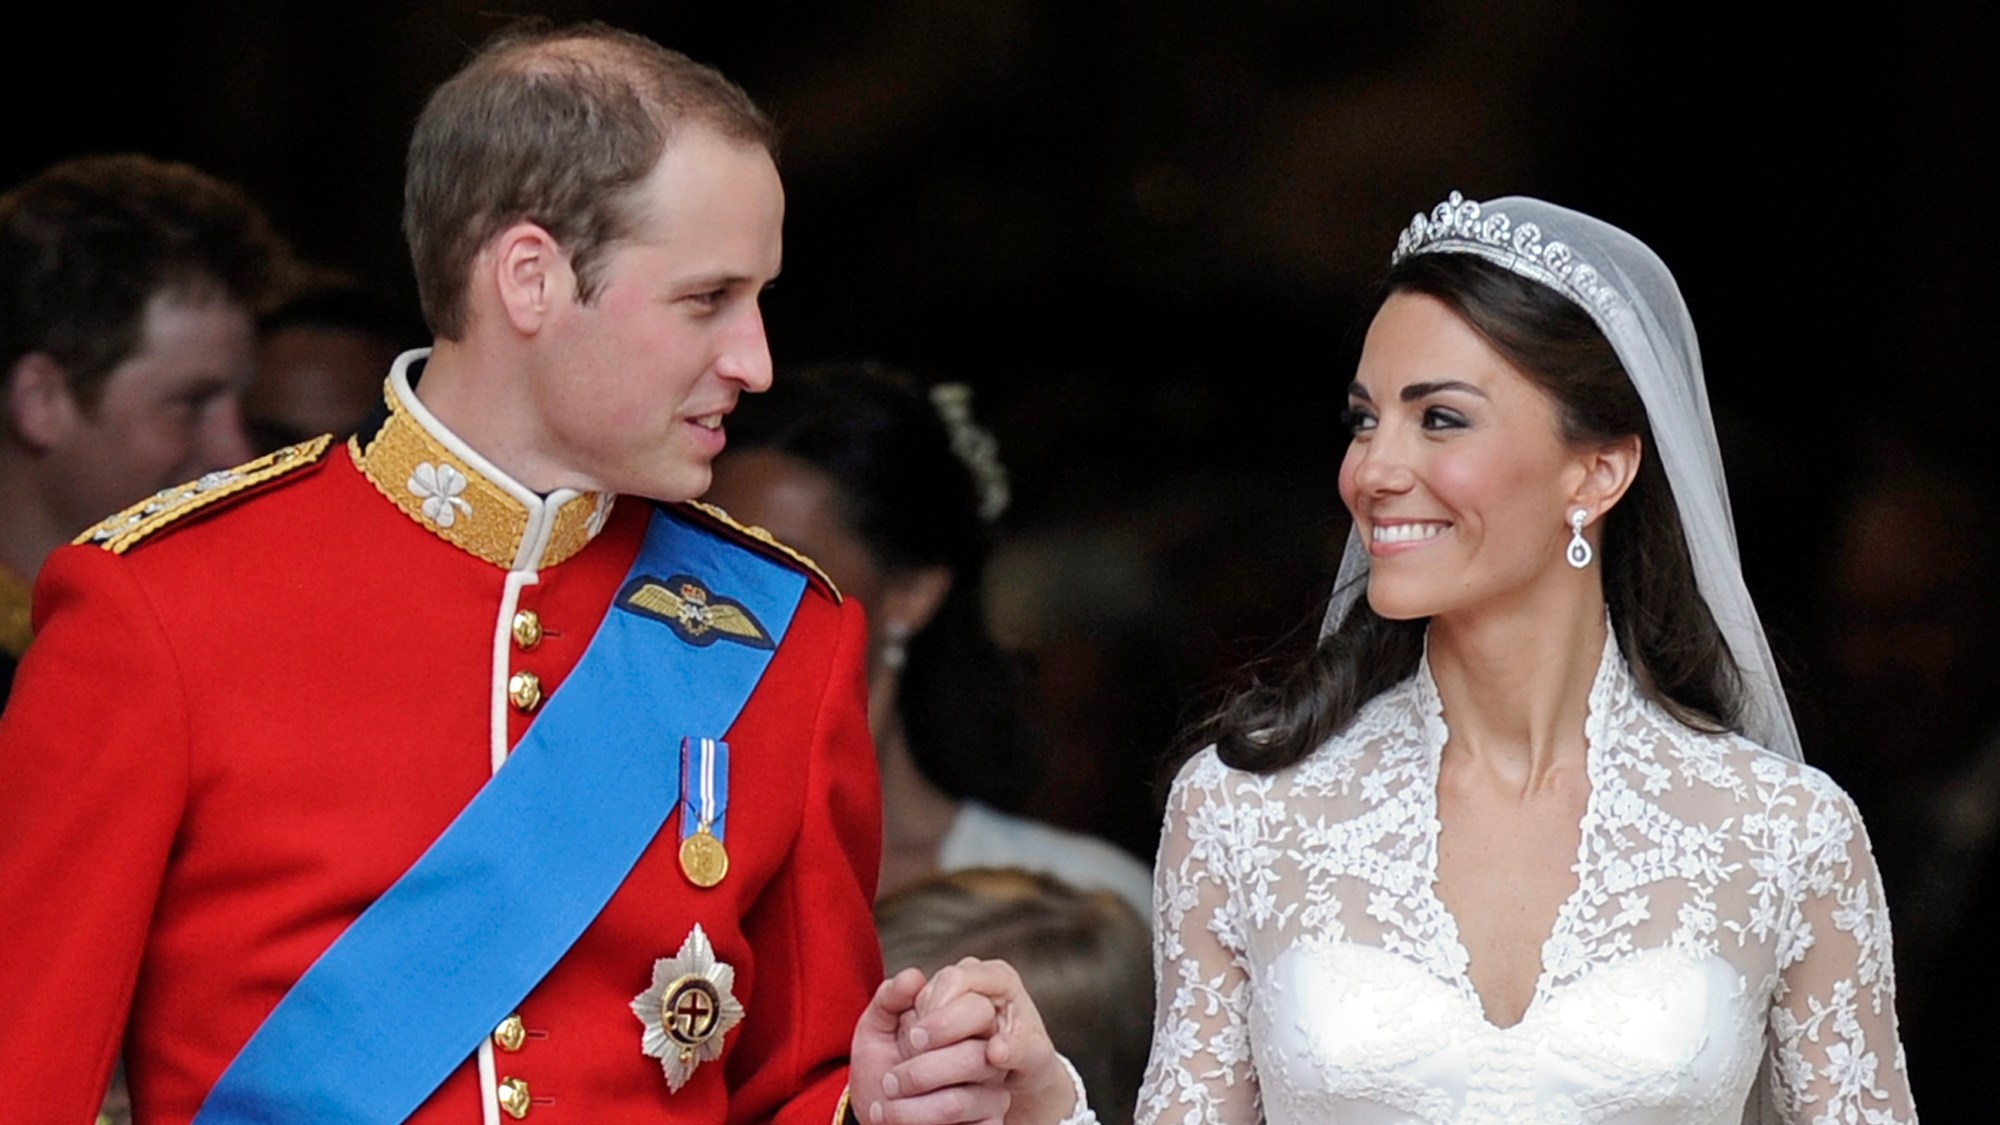 The Prince and Princess of Wales on their wedding day in 2011